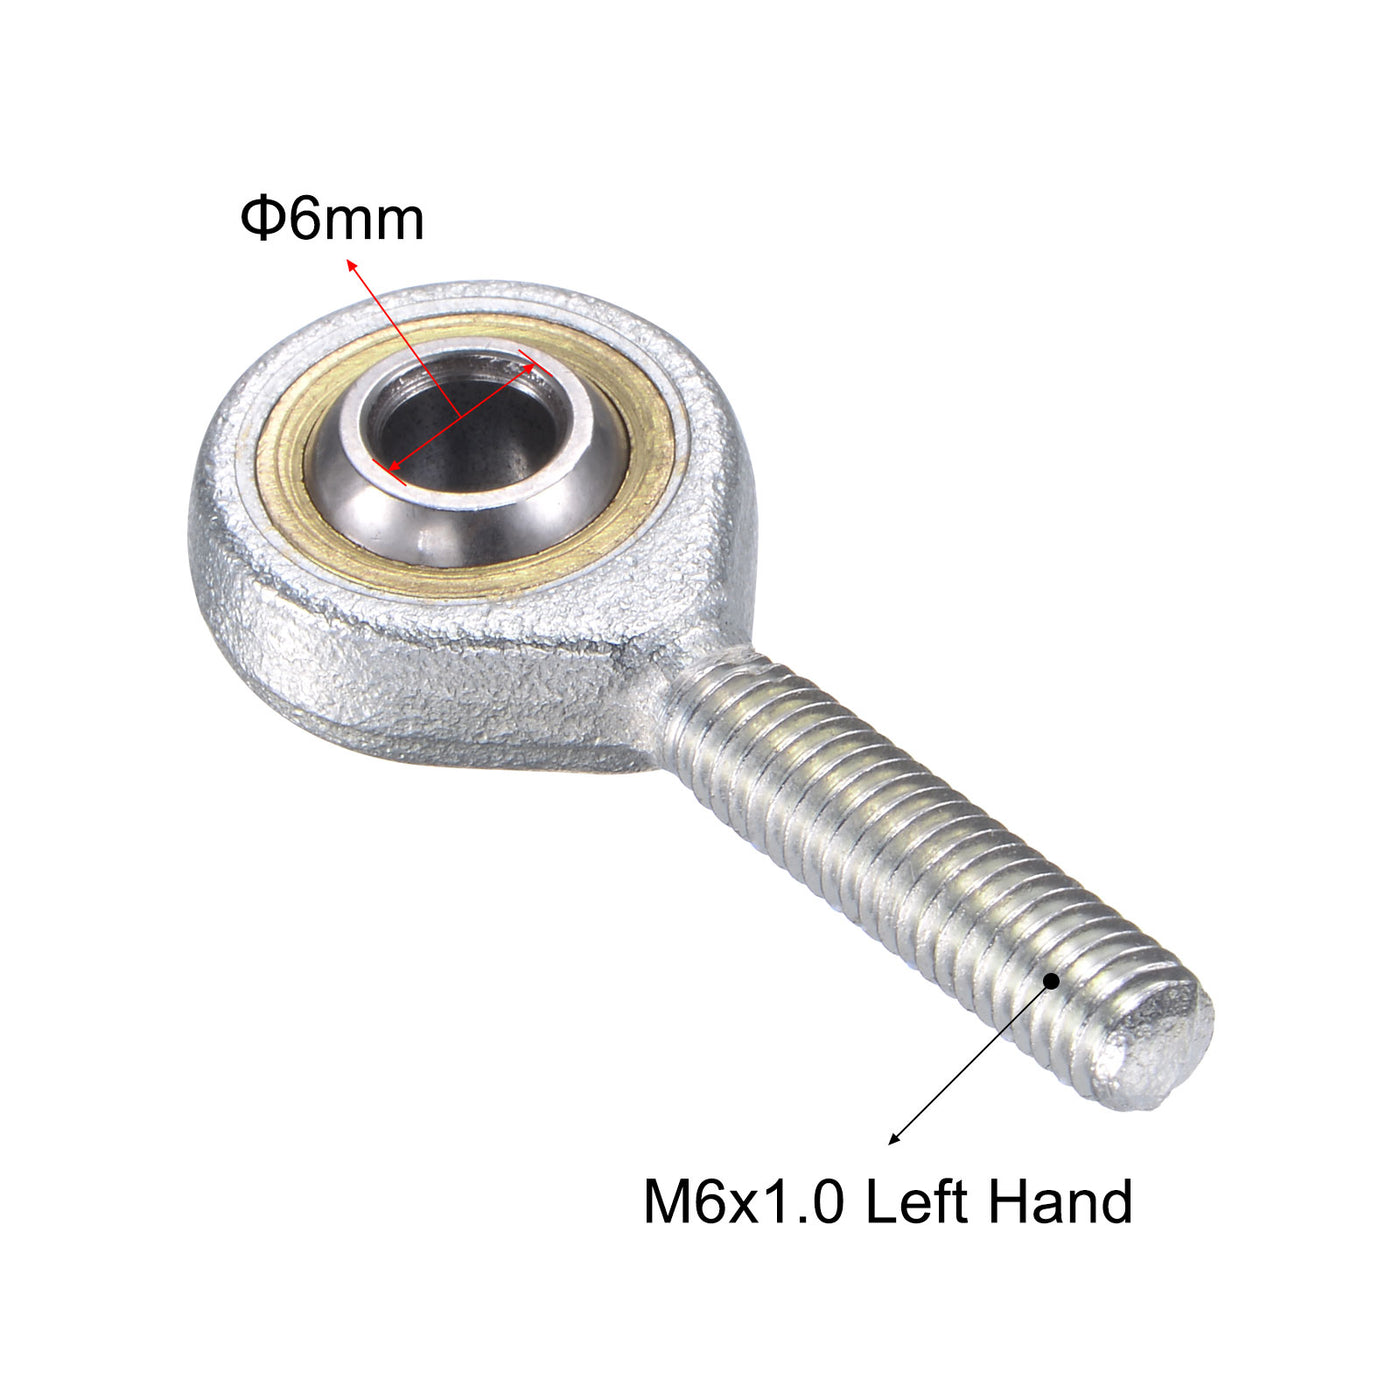 uxcell Uxcell SA6TK POSA6 Rod End Bearing 6mm Bore M6x1.0 Left Hand Male Thread